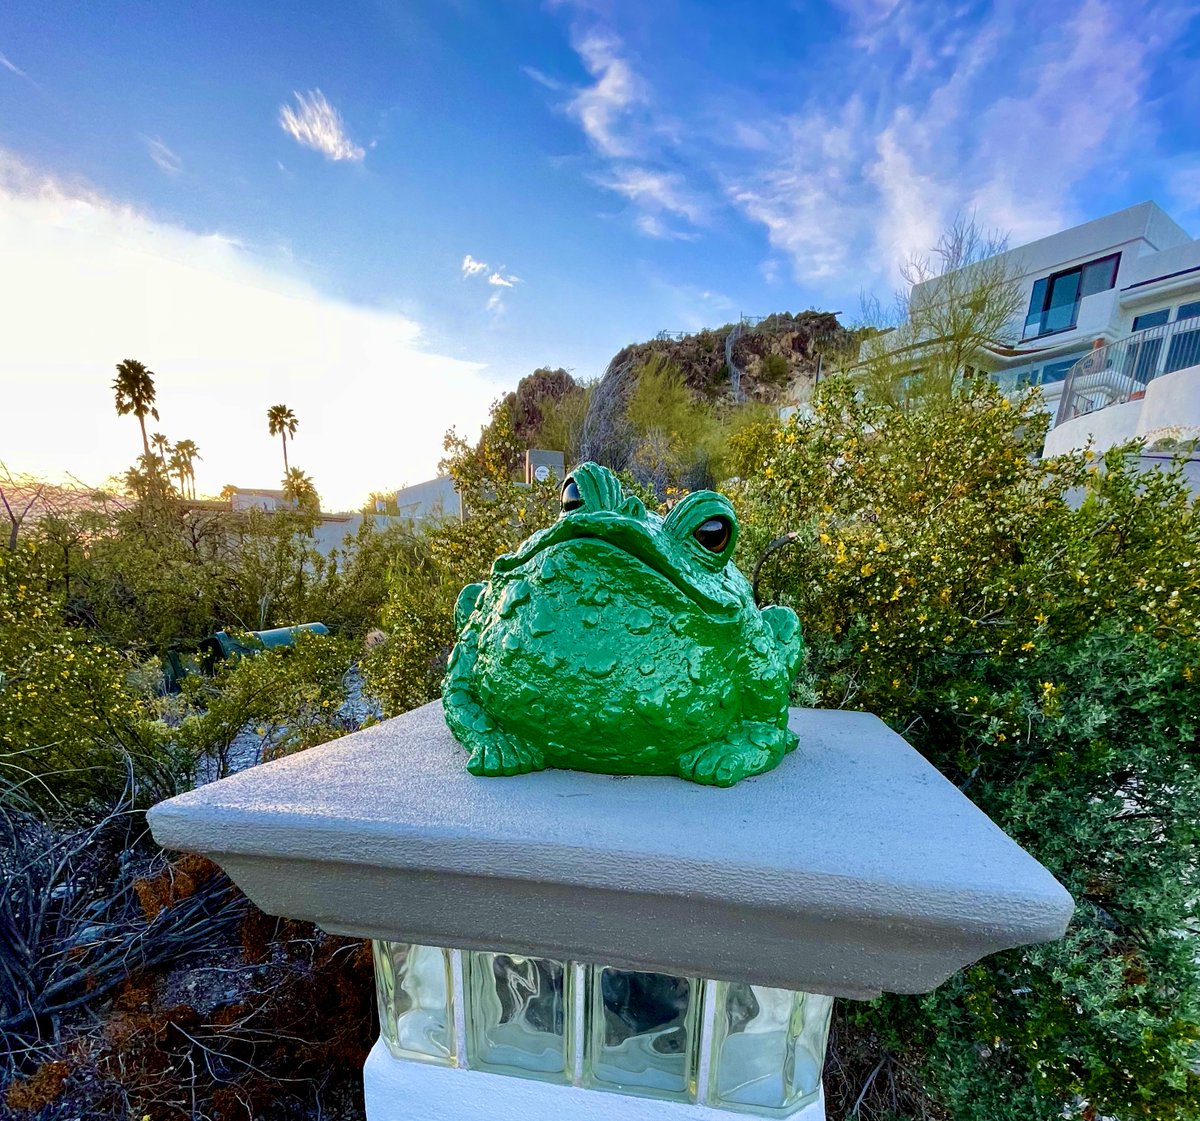 Happy Friday !🌞

#Photography 
#ParadiseValley 
#Frog 🐸